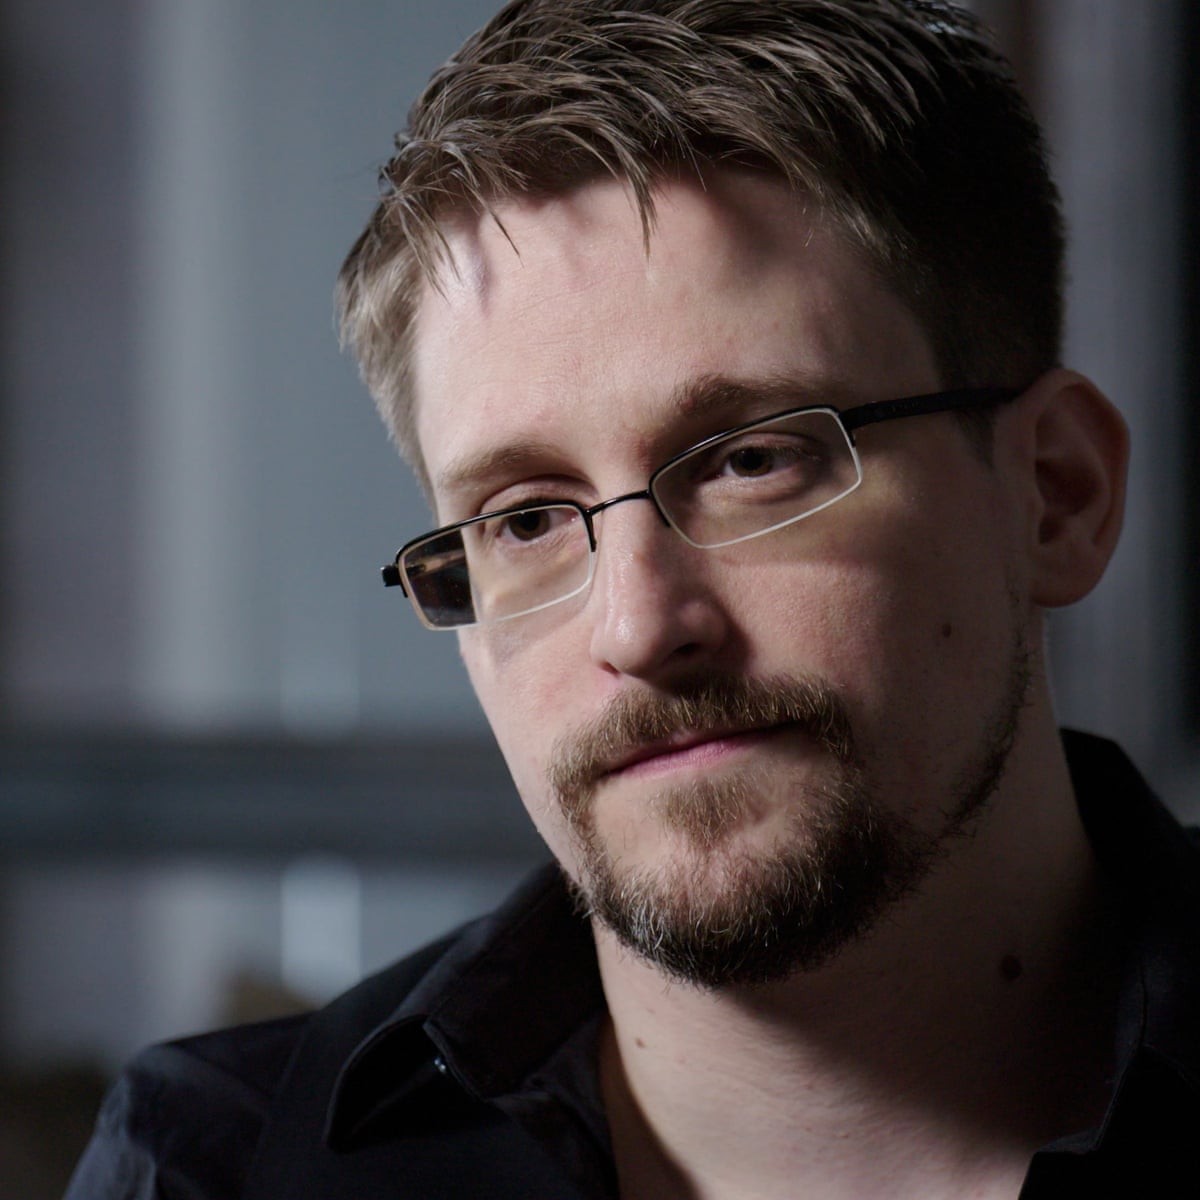 Edward Snowden, “What I learned from games: playing for and against mass  surveillance”